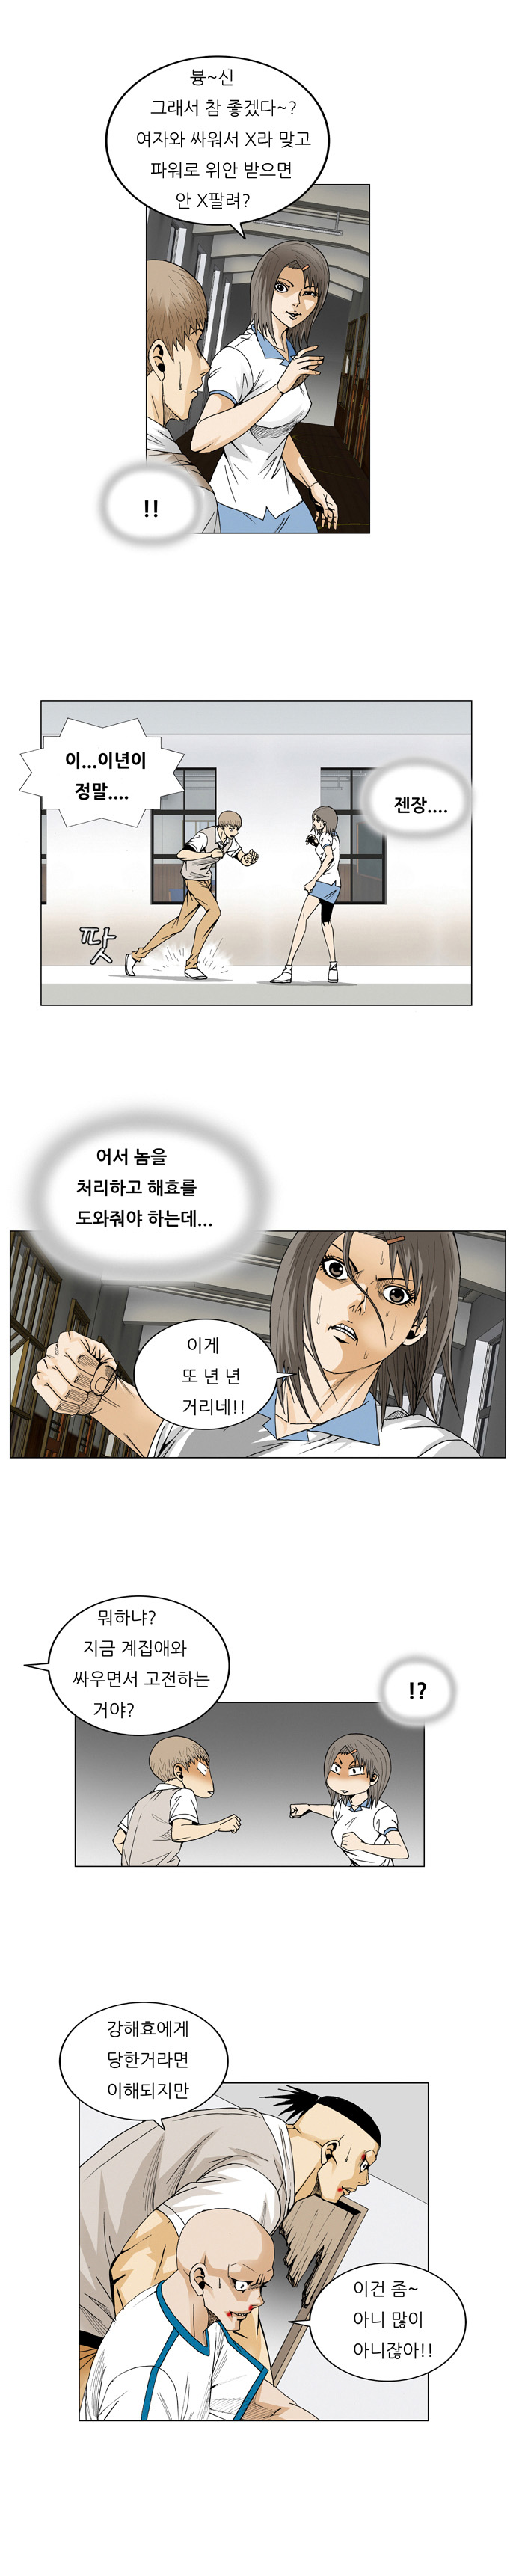 Ultimate Legend - Kang Hae Hyo - Chapter 54 - Page 3